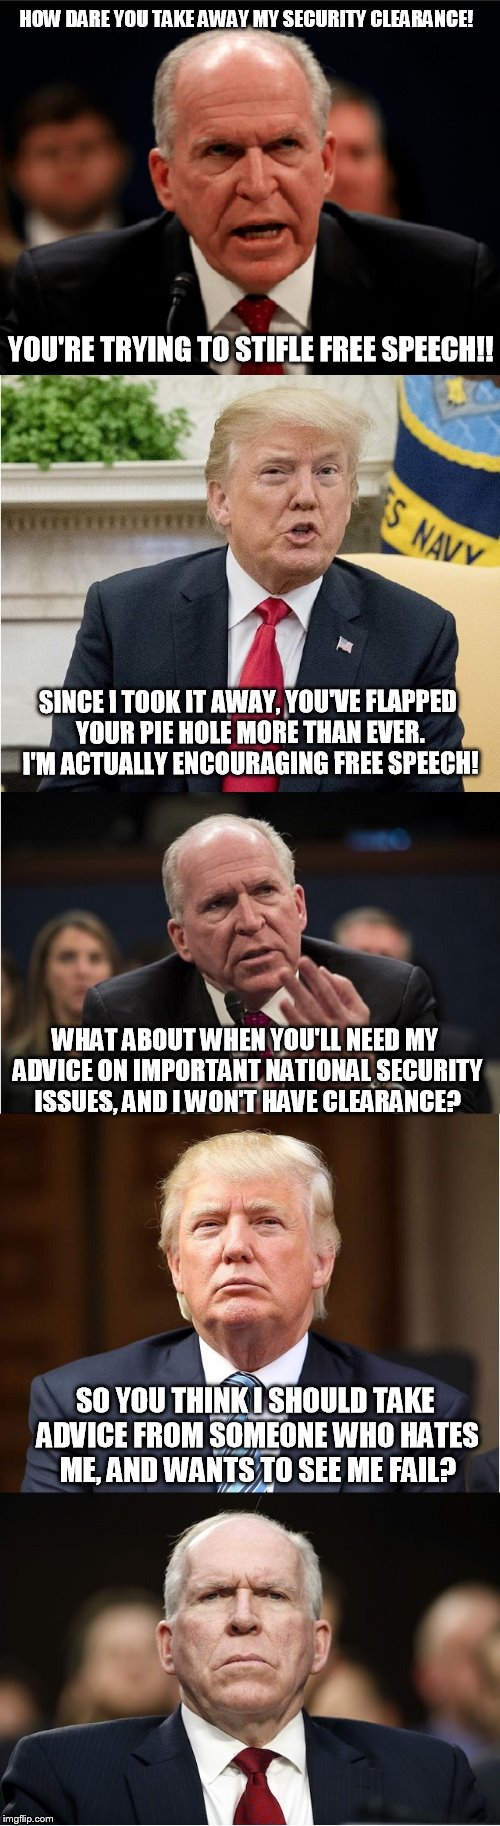 HOW DARE YOU TAKE AWAY MY SECURITY CLEARANCE! YOU'RE TRYING TO STIFLE FREE SPEECH!! SINCE I TOOK IT AWAY, YOU'VE FLAPPED YOUR PIE HOLE MORE THAN EVER. I'M ACTUALLY ENCOURAGING FREE SPEECH! WHAT ABOUT WHEN YOU'LL NEED MY ADVICE ON IMPORTANT NATIONAL SECURITY ISSUES, AND I WON'T HAVE CLEARANCE? SO YOU THINK I SHOULD TAKE ADVICE FROM SOMEONE WHO HATES ME, AND WANTS TO SEE ME FAIL? | image tagged in trump | made w/ Imgflip meme maker